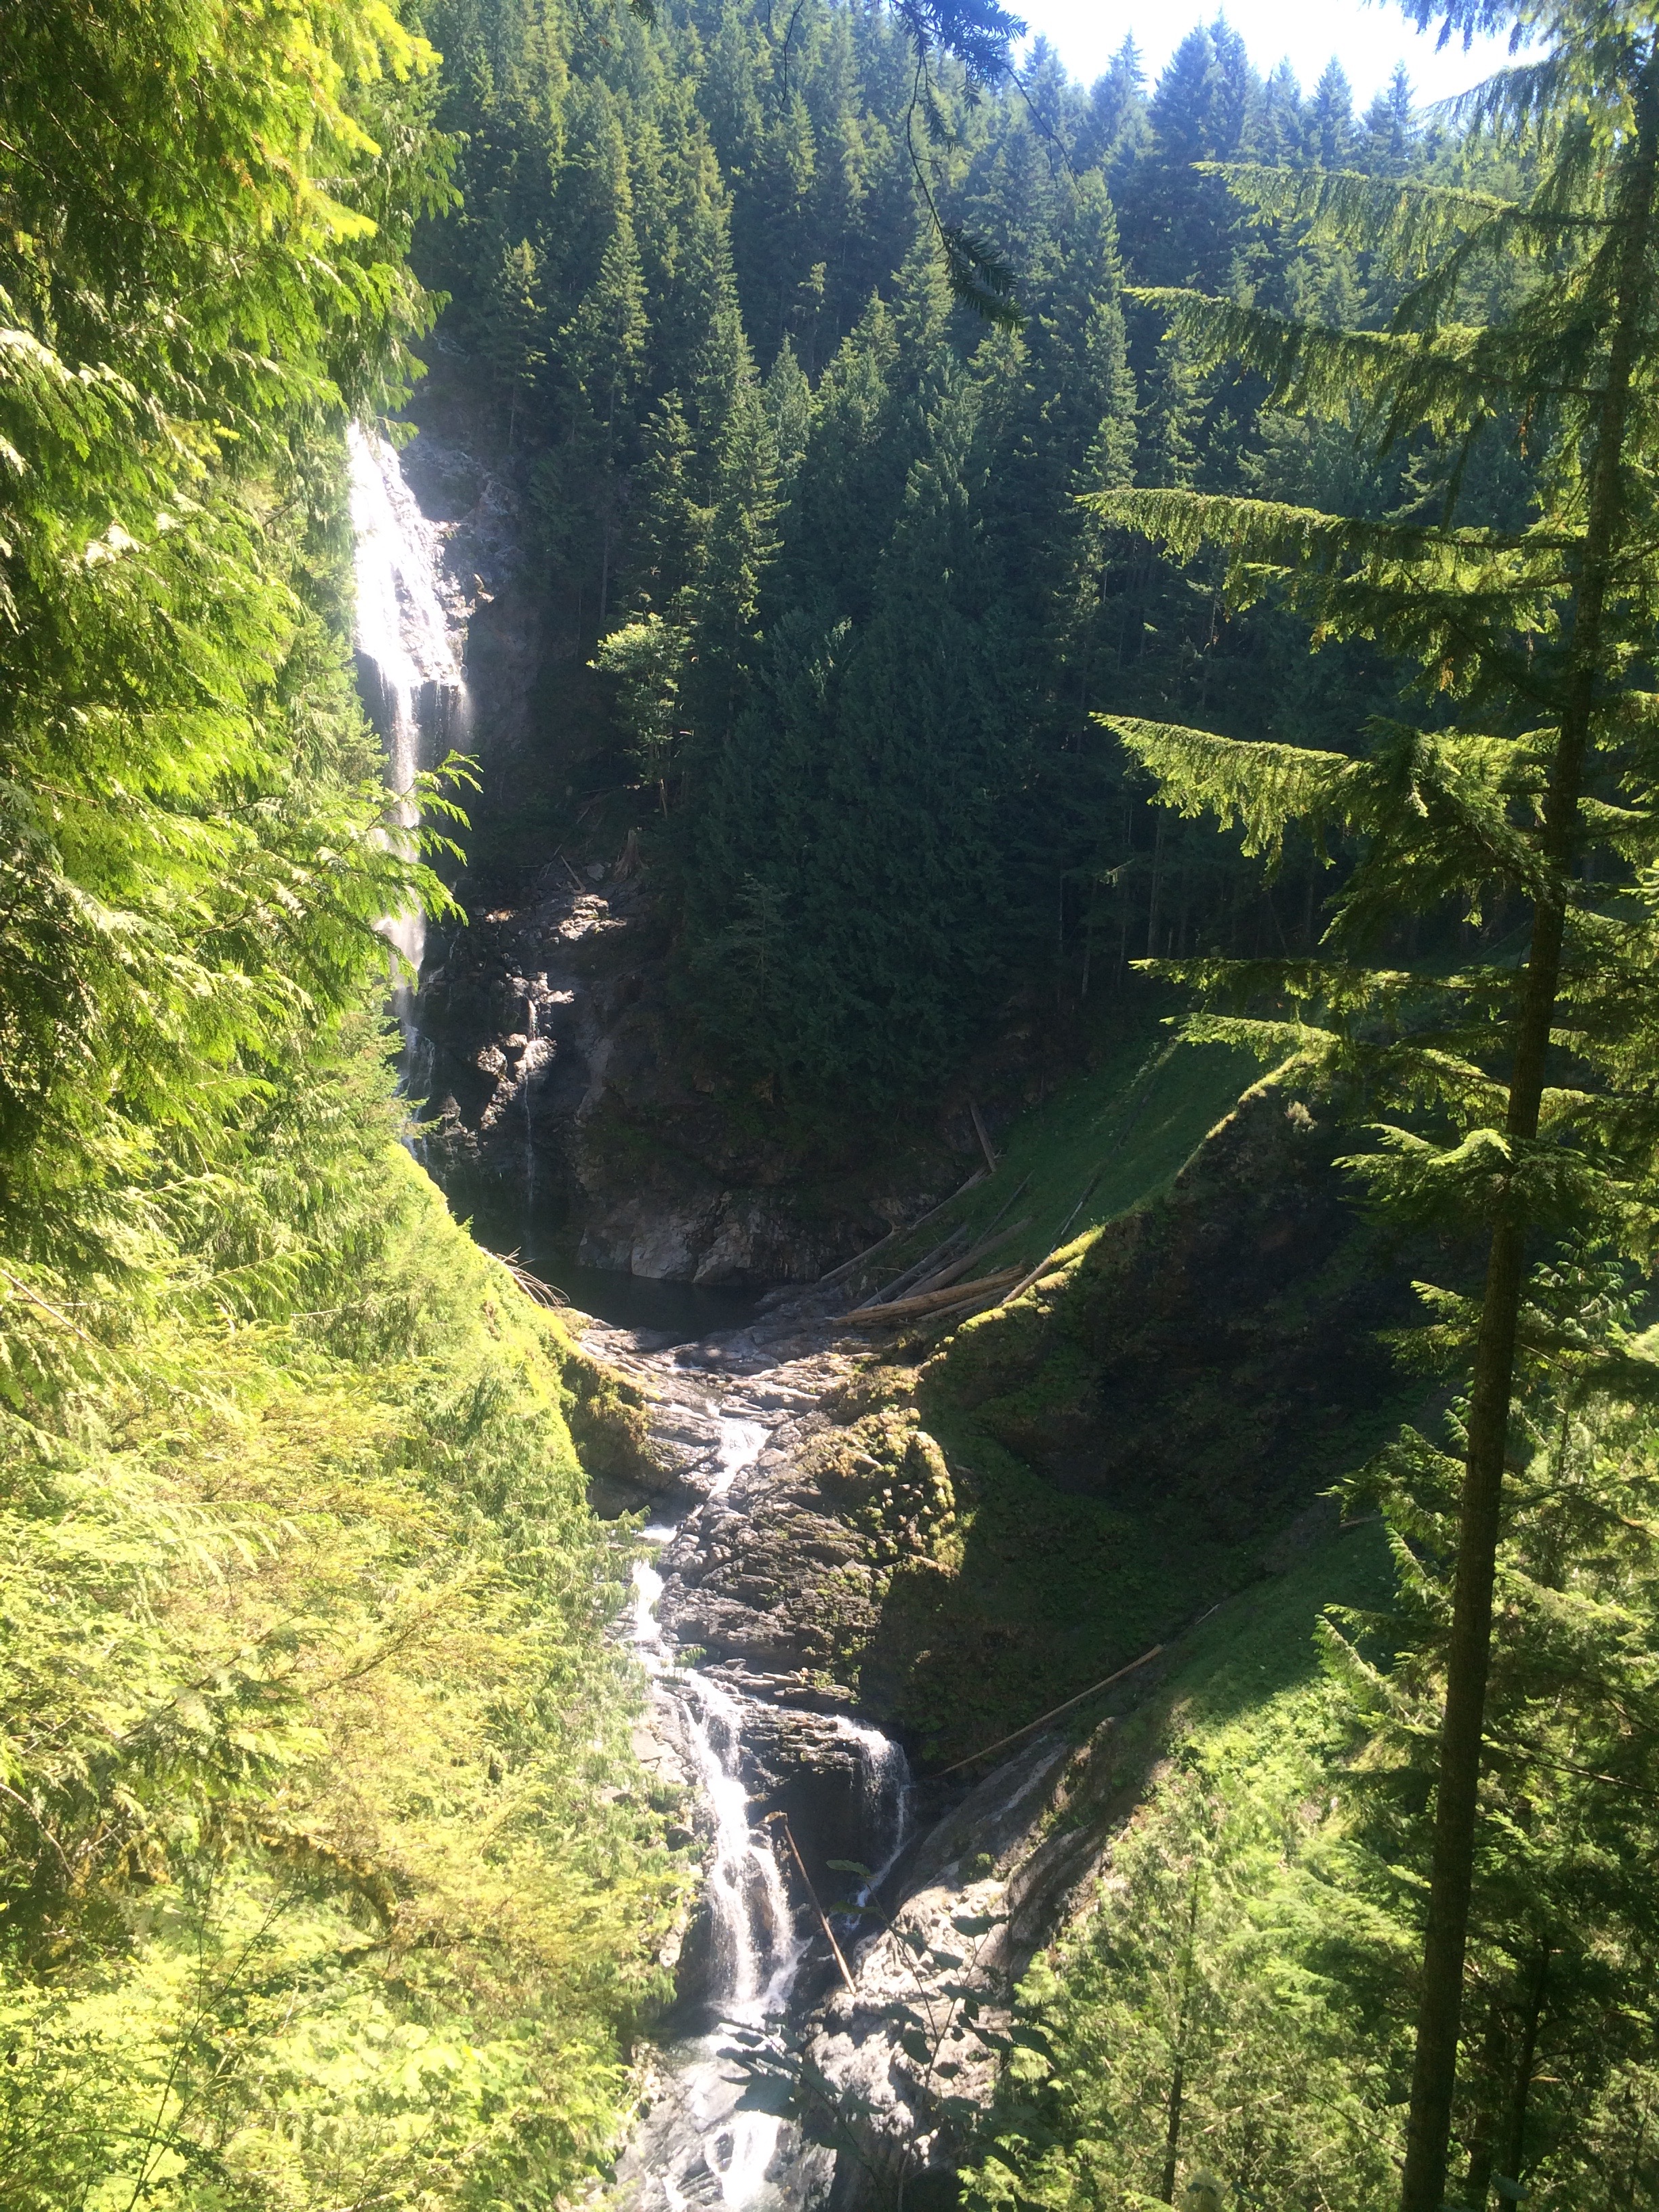 Best Hikes in the Cascades - Twin Falls